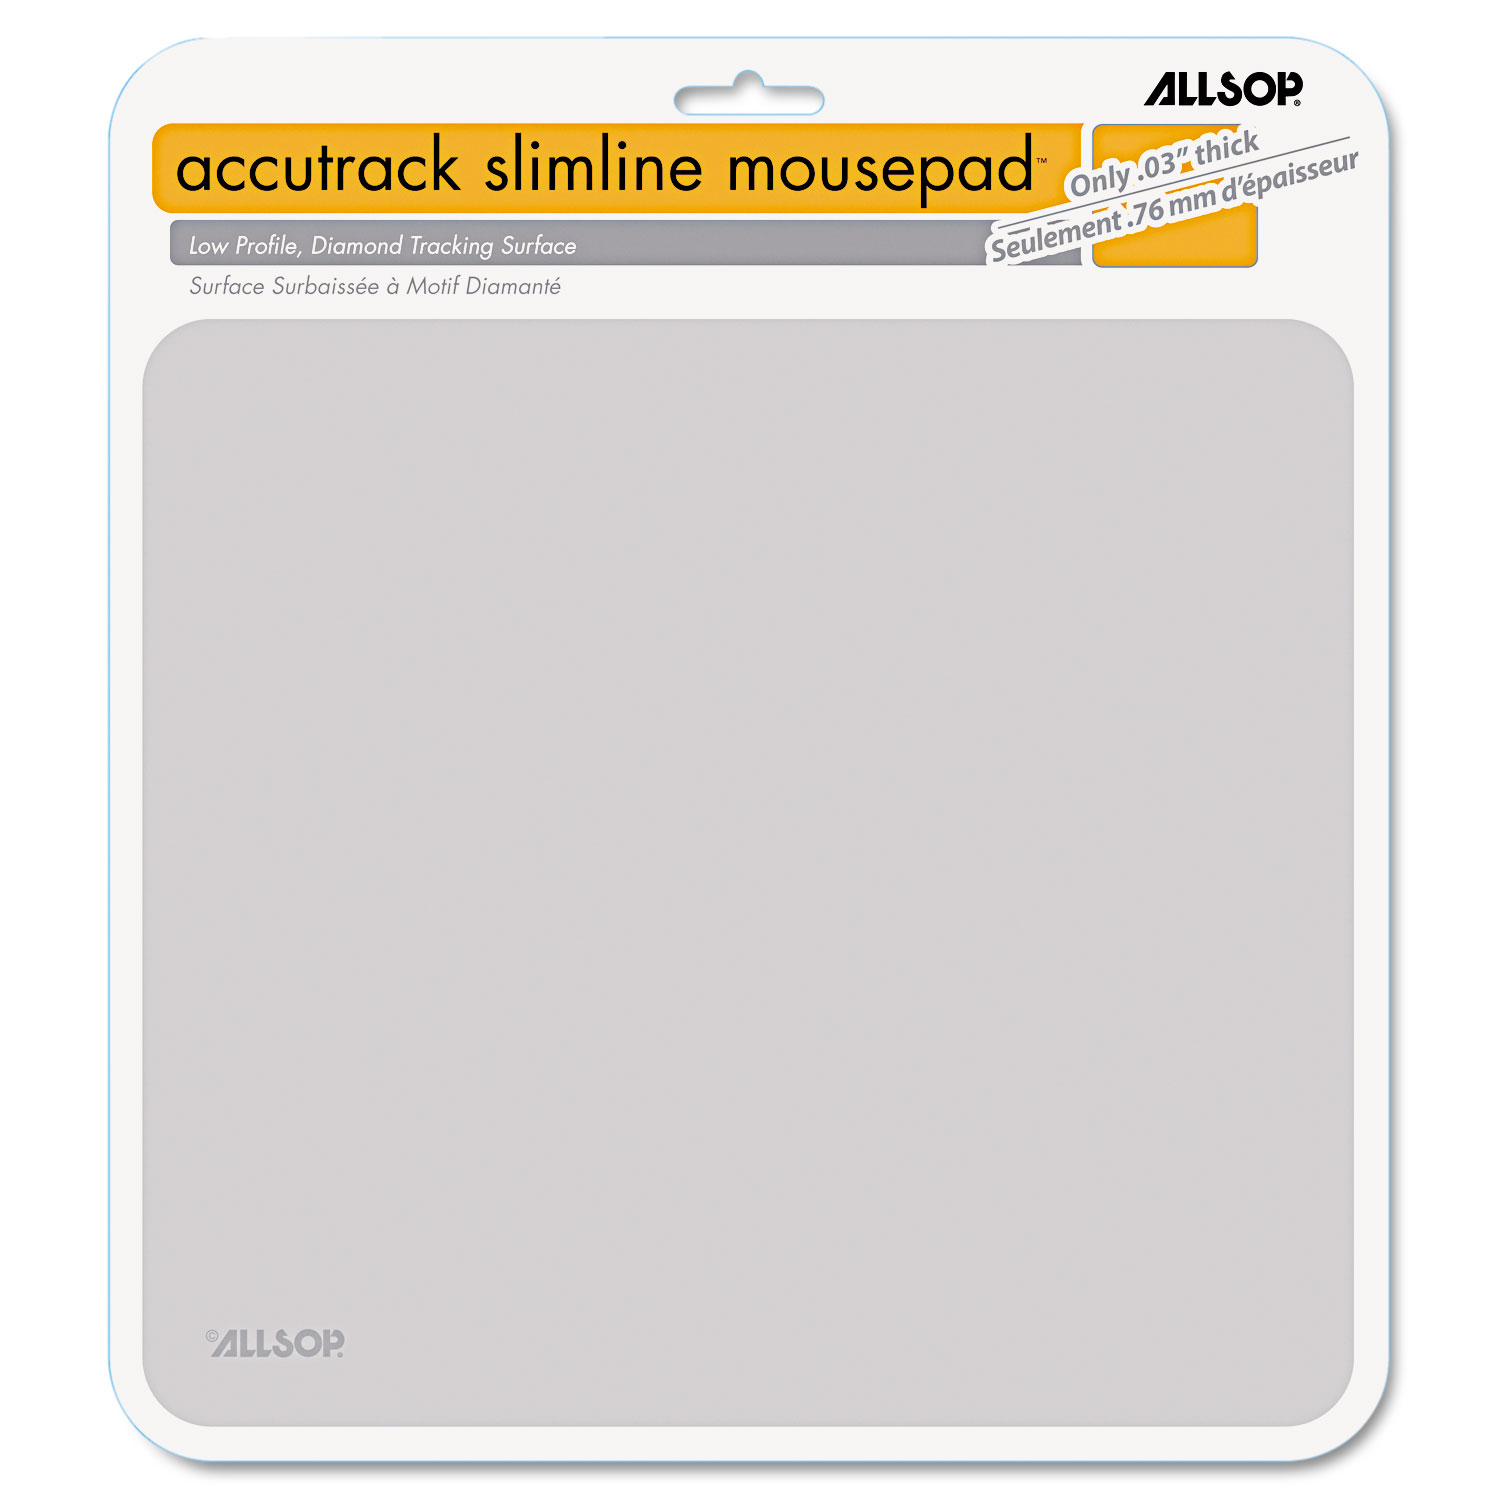 Accutrack Slimline Mouse Pad, Silver, 8 3/4 x 8